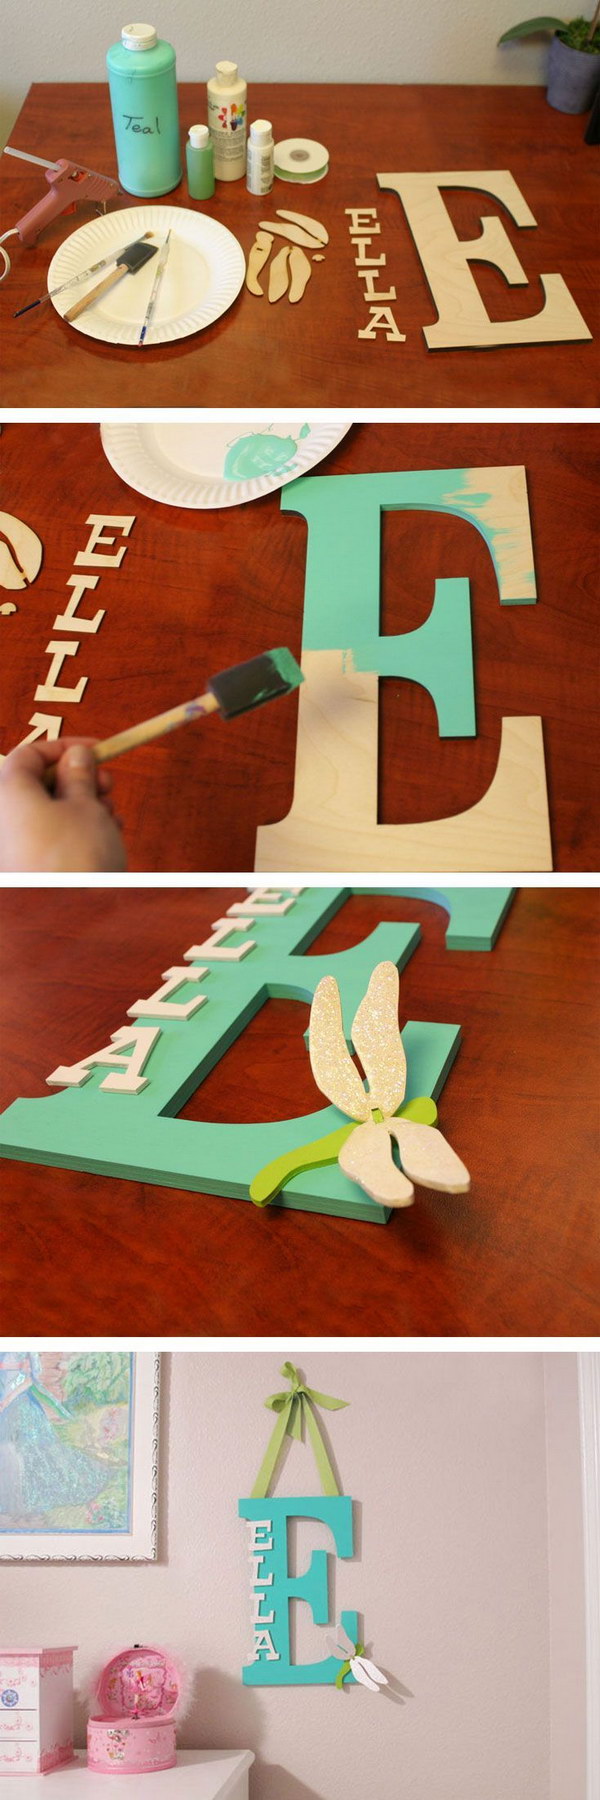 45 Awesome Diy Ideas For Making Your Own Decorative Letters 2017